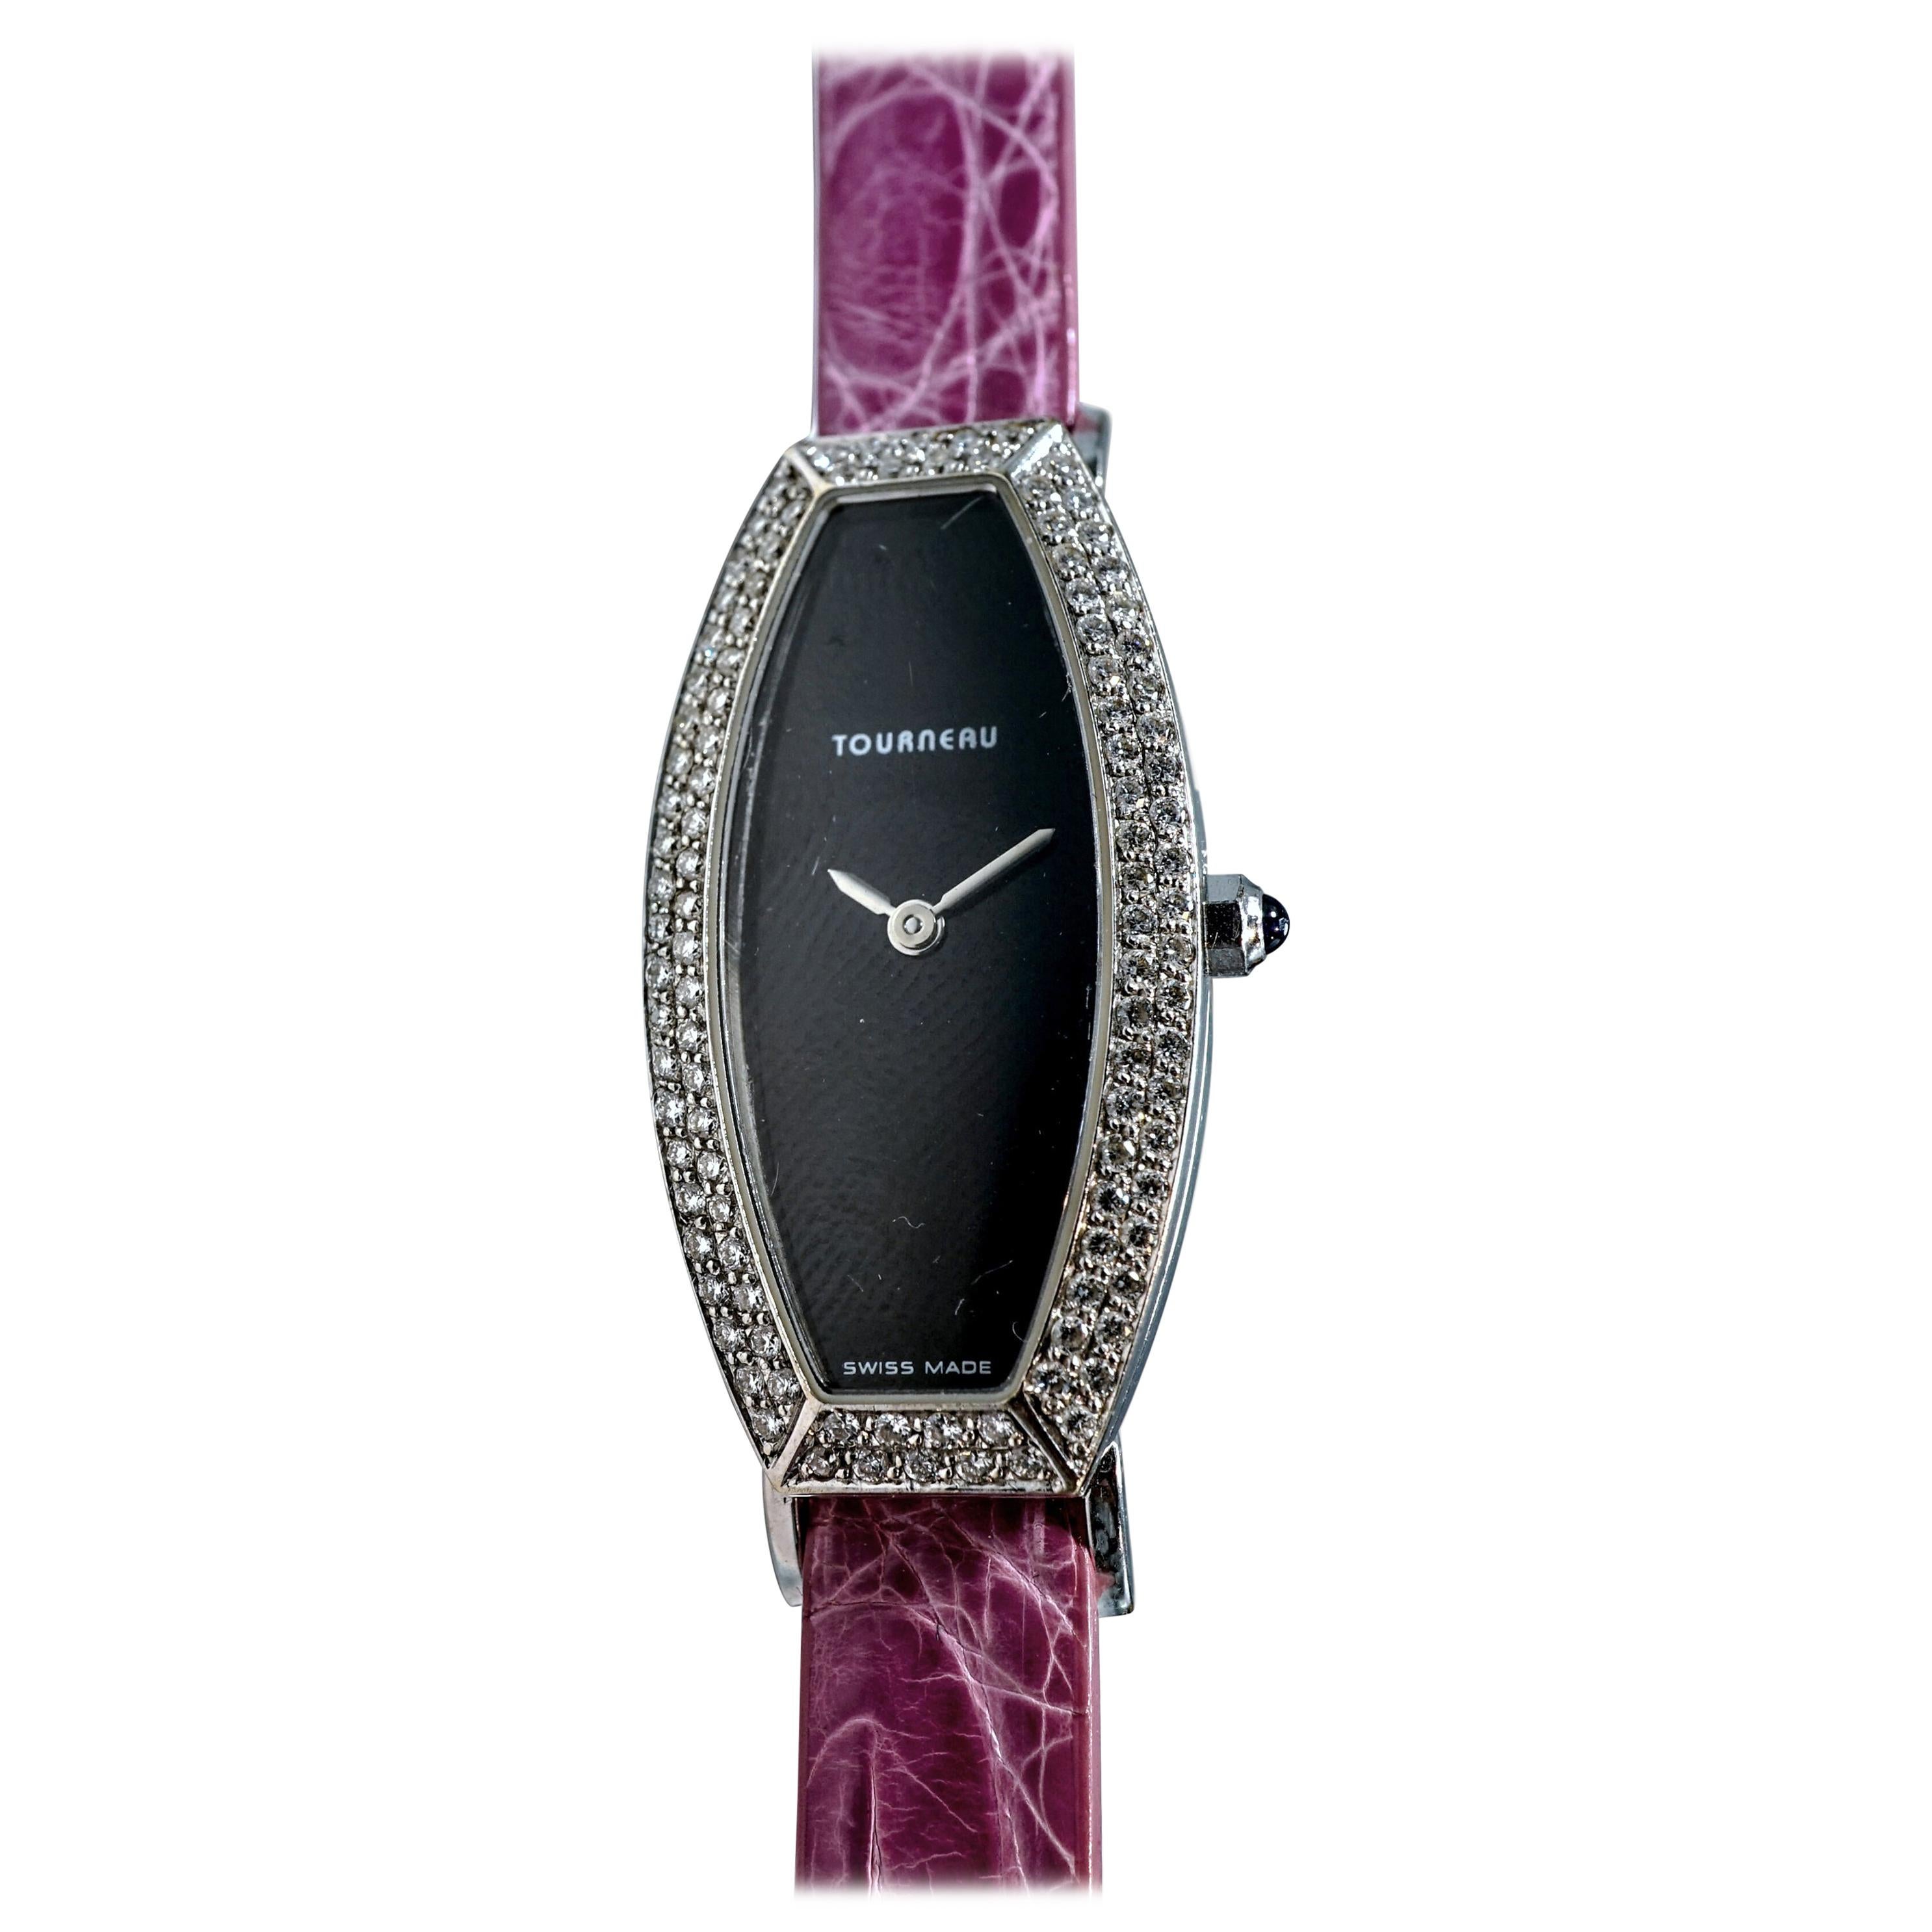 Tourneru 18 Karat White Gold Diamond and Mother of Pearl Watch with Gator Strap For Sale